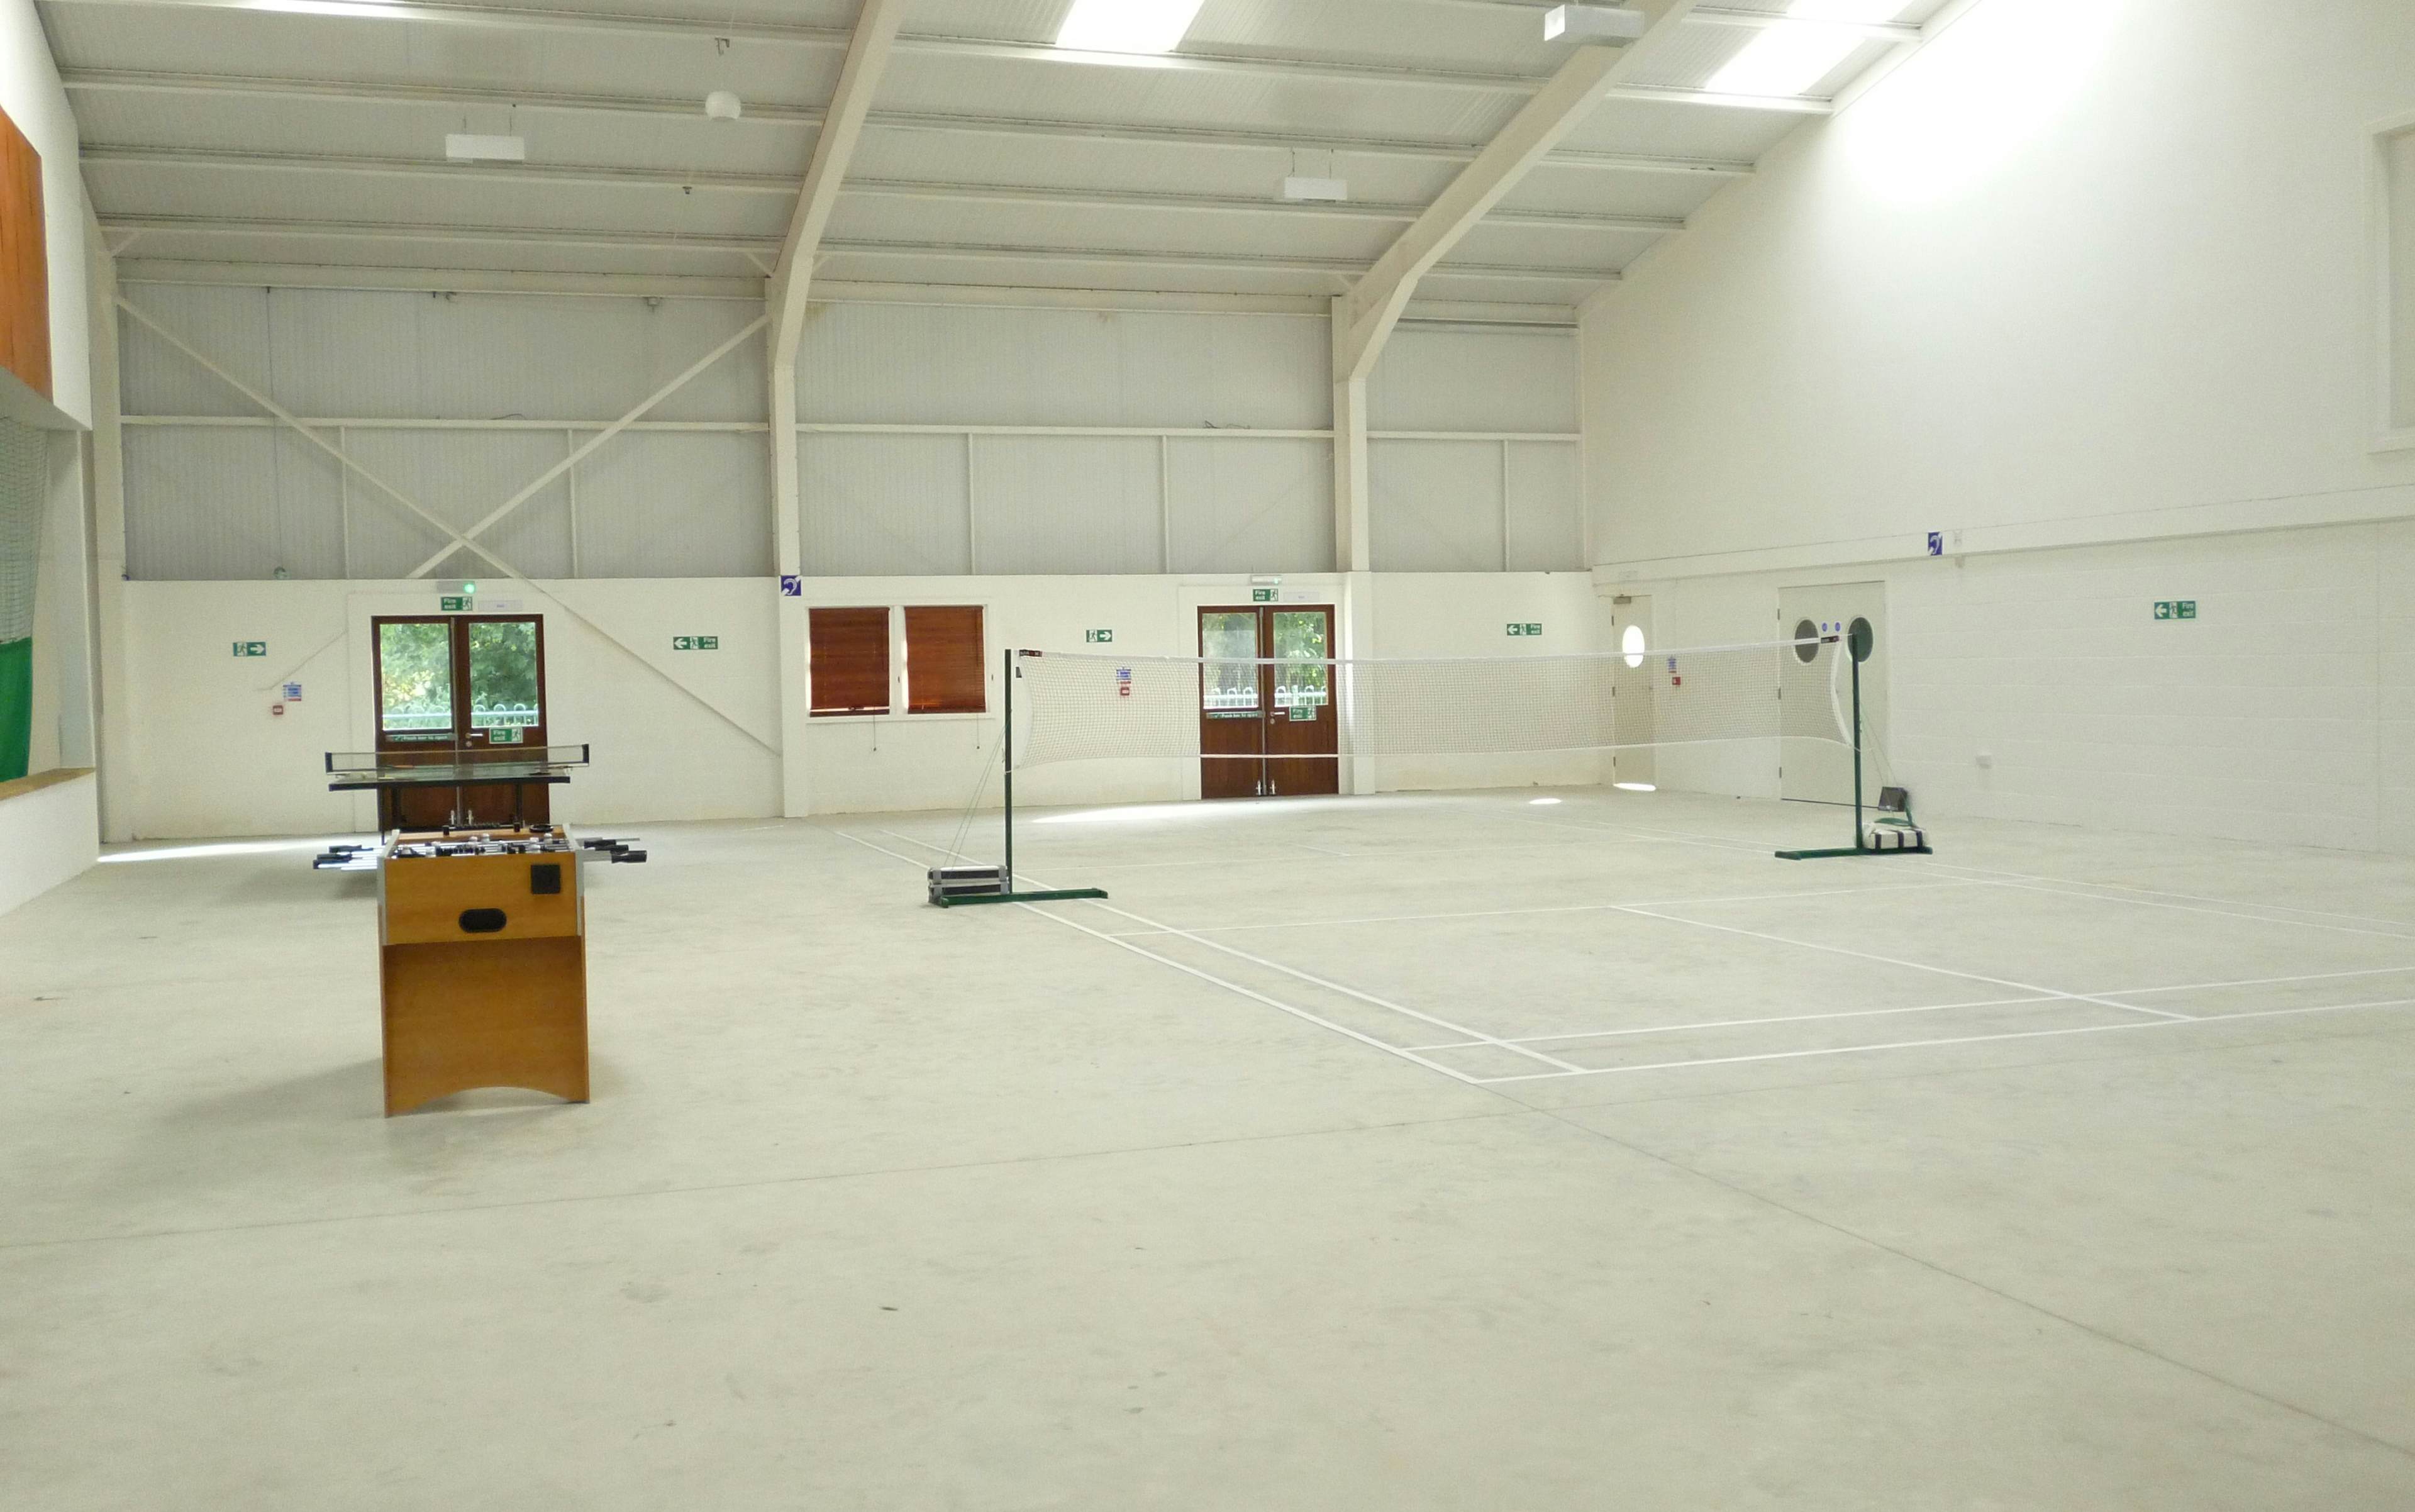 Deanwood Barn Conference Centre - Sports Hall / Conference Hall image 1